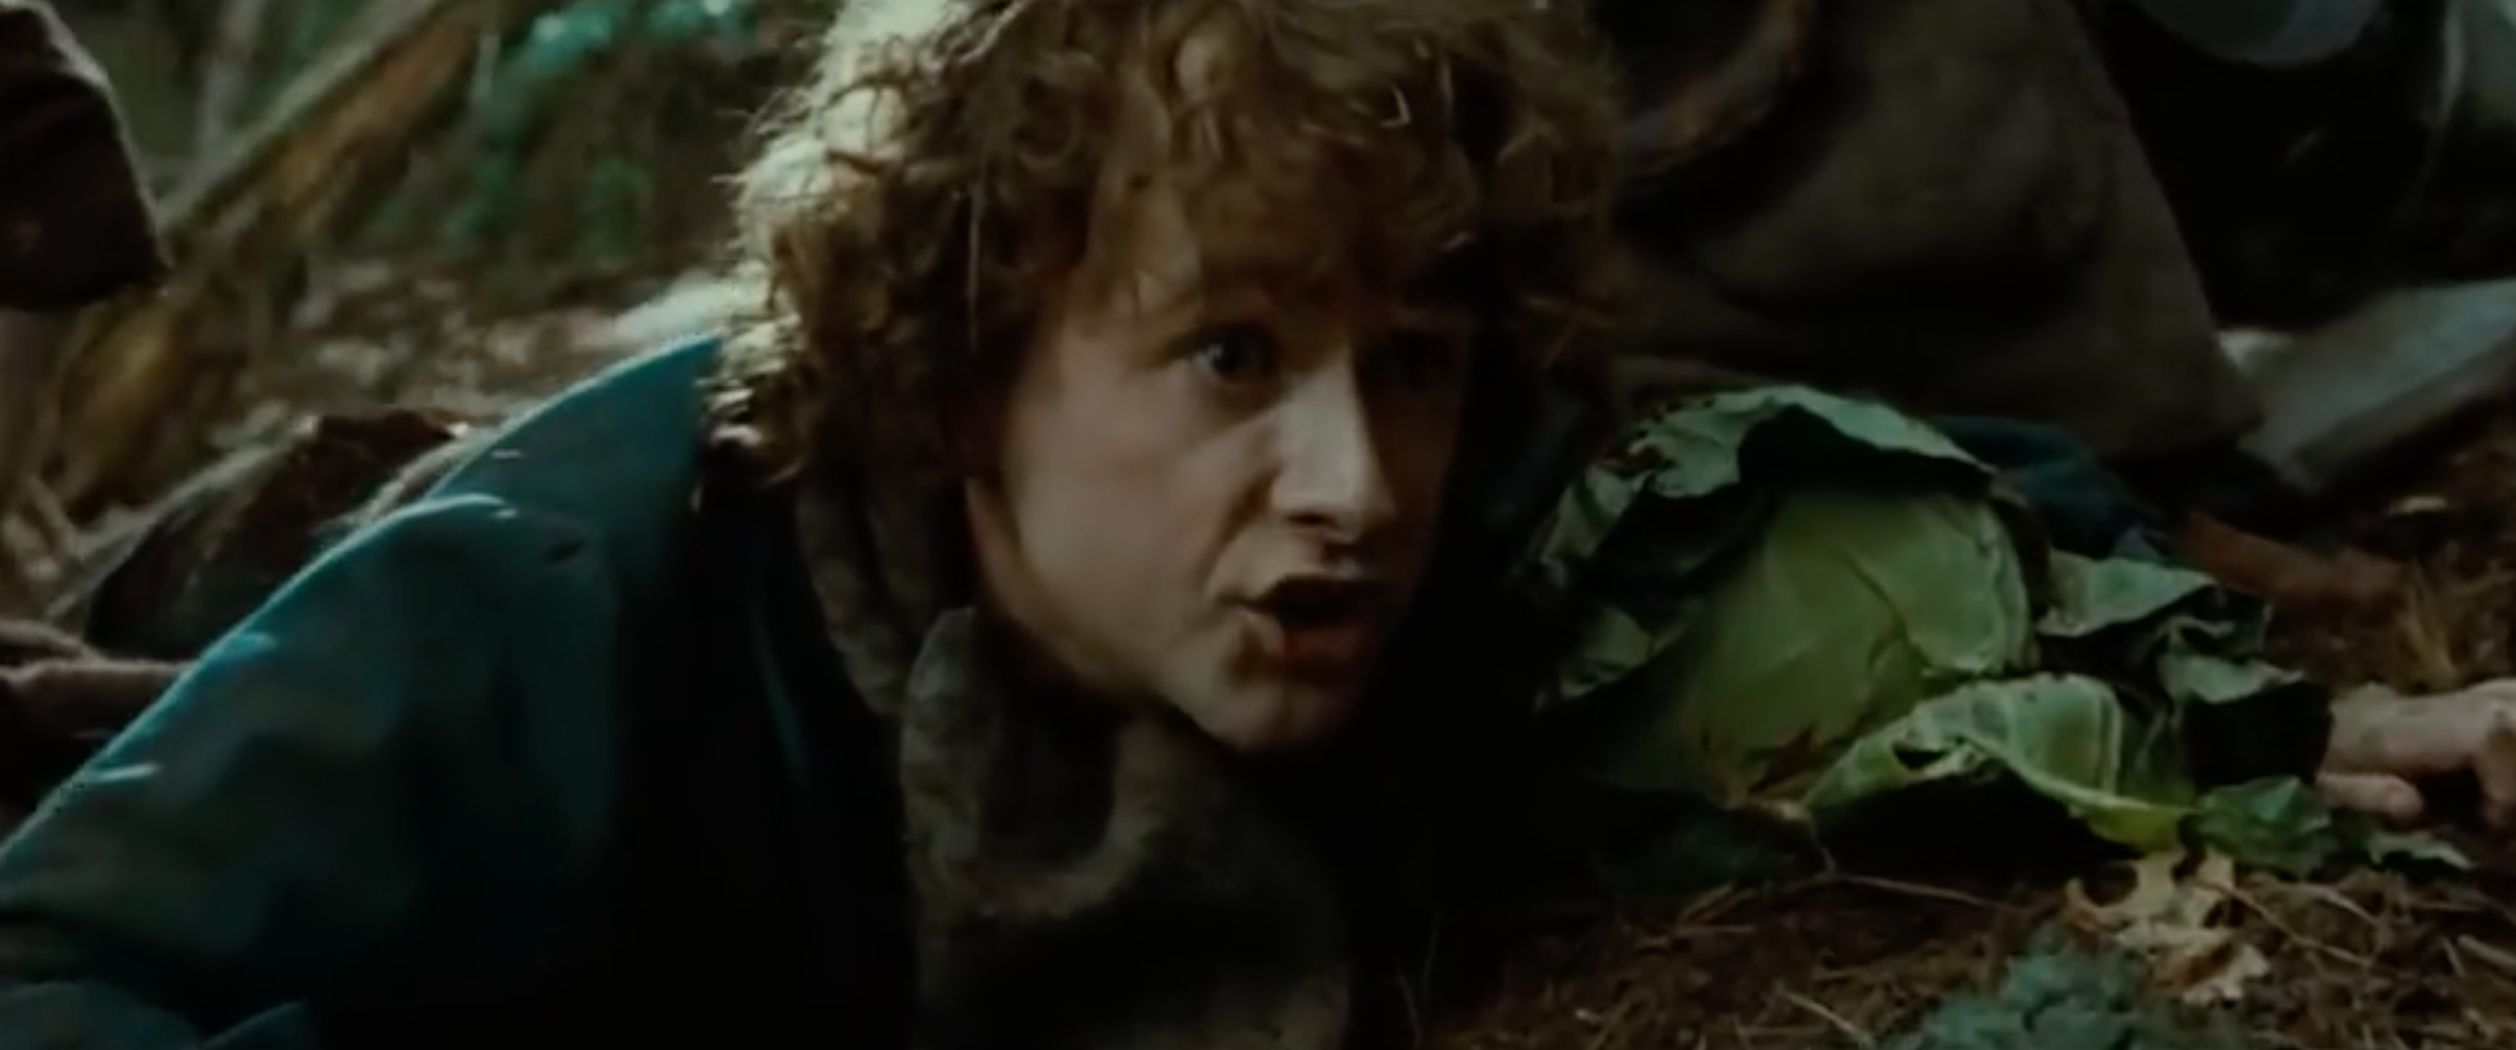 The Lord Of The Rings' Fellowship Actors All Got The Same Tattoo